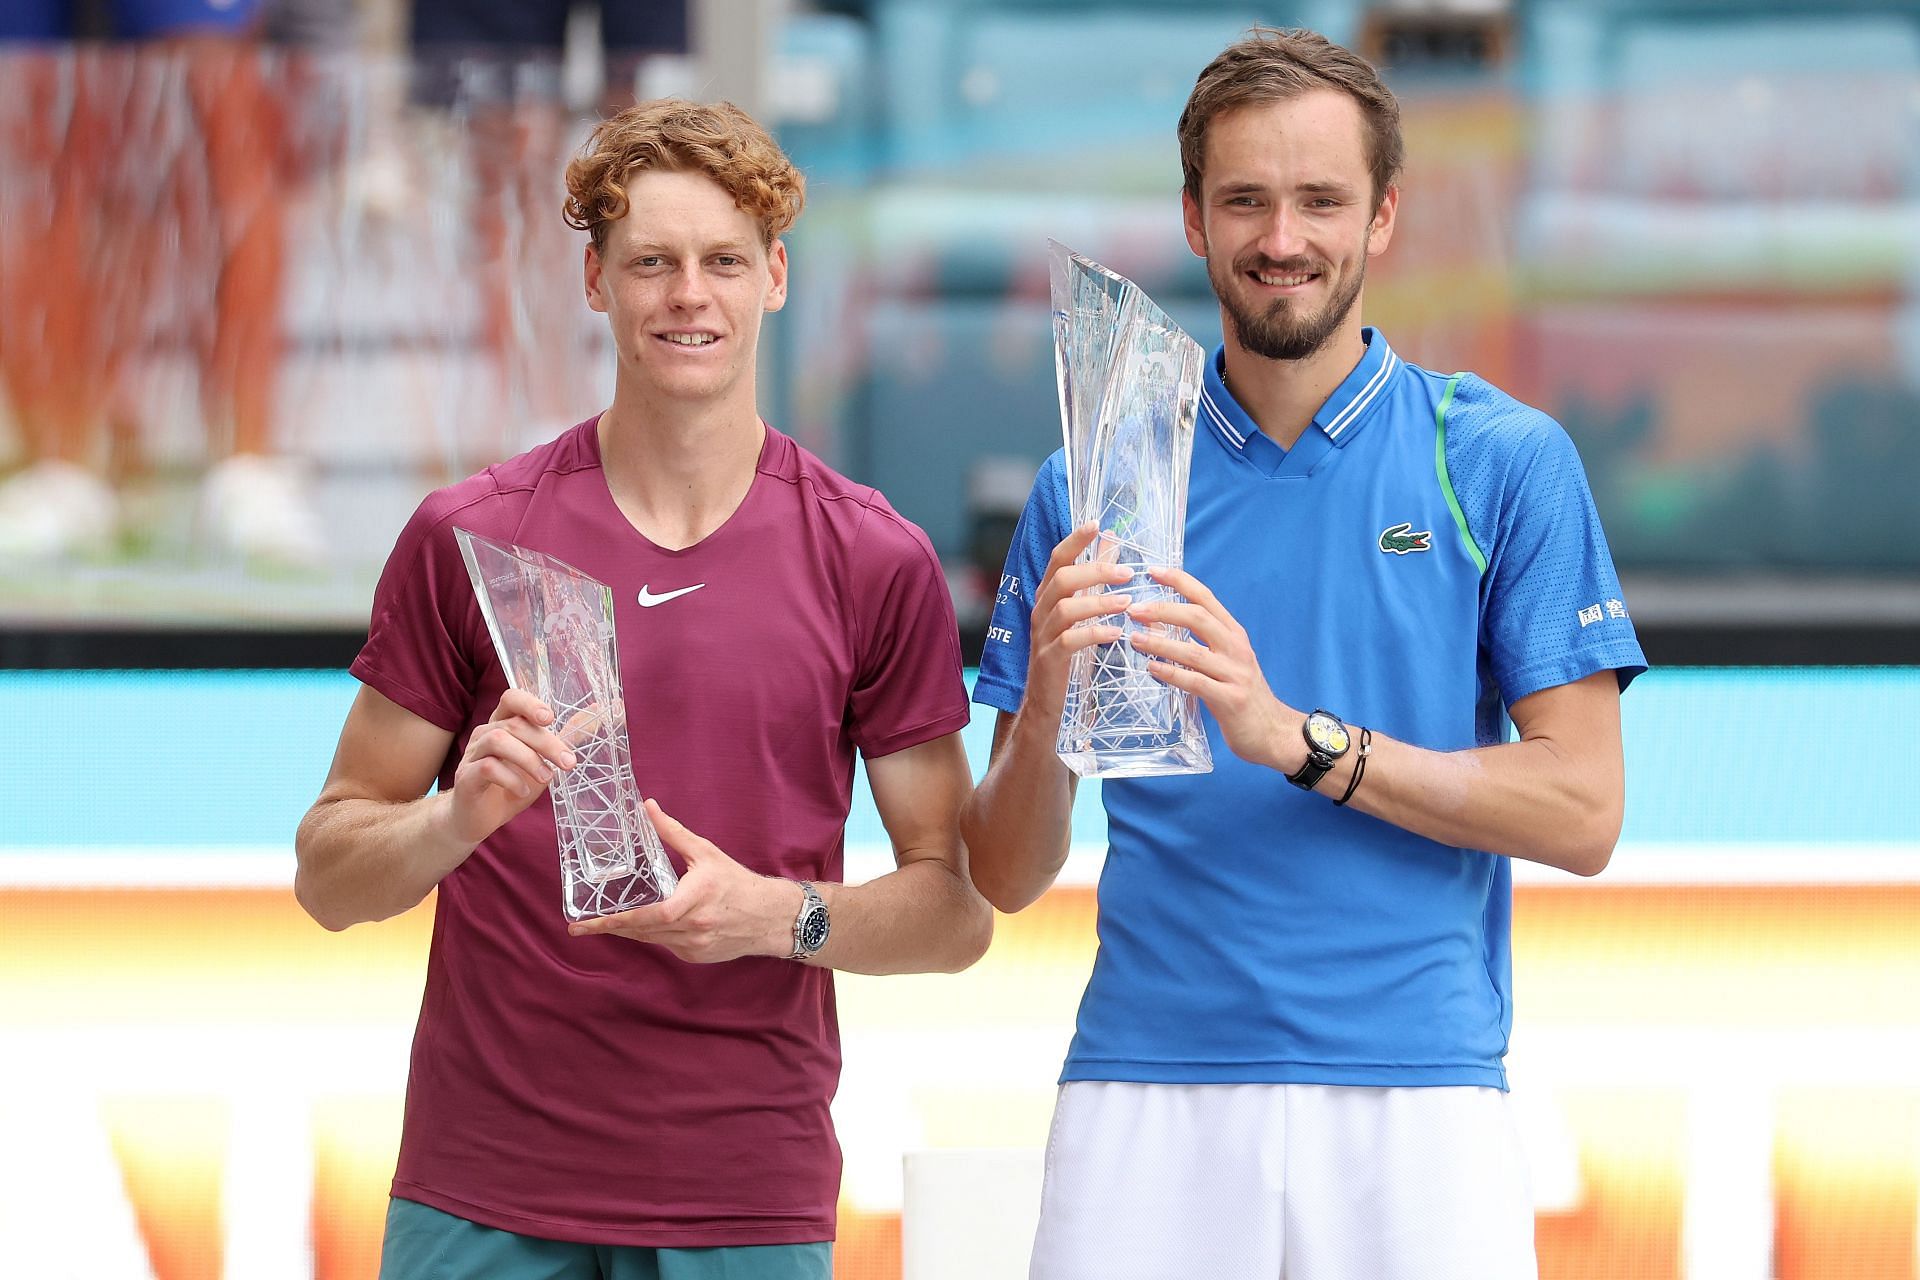 Medvedev beat Sinner to win his maiden Miami Masters title